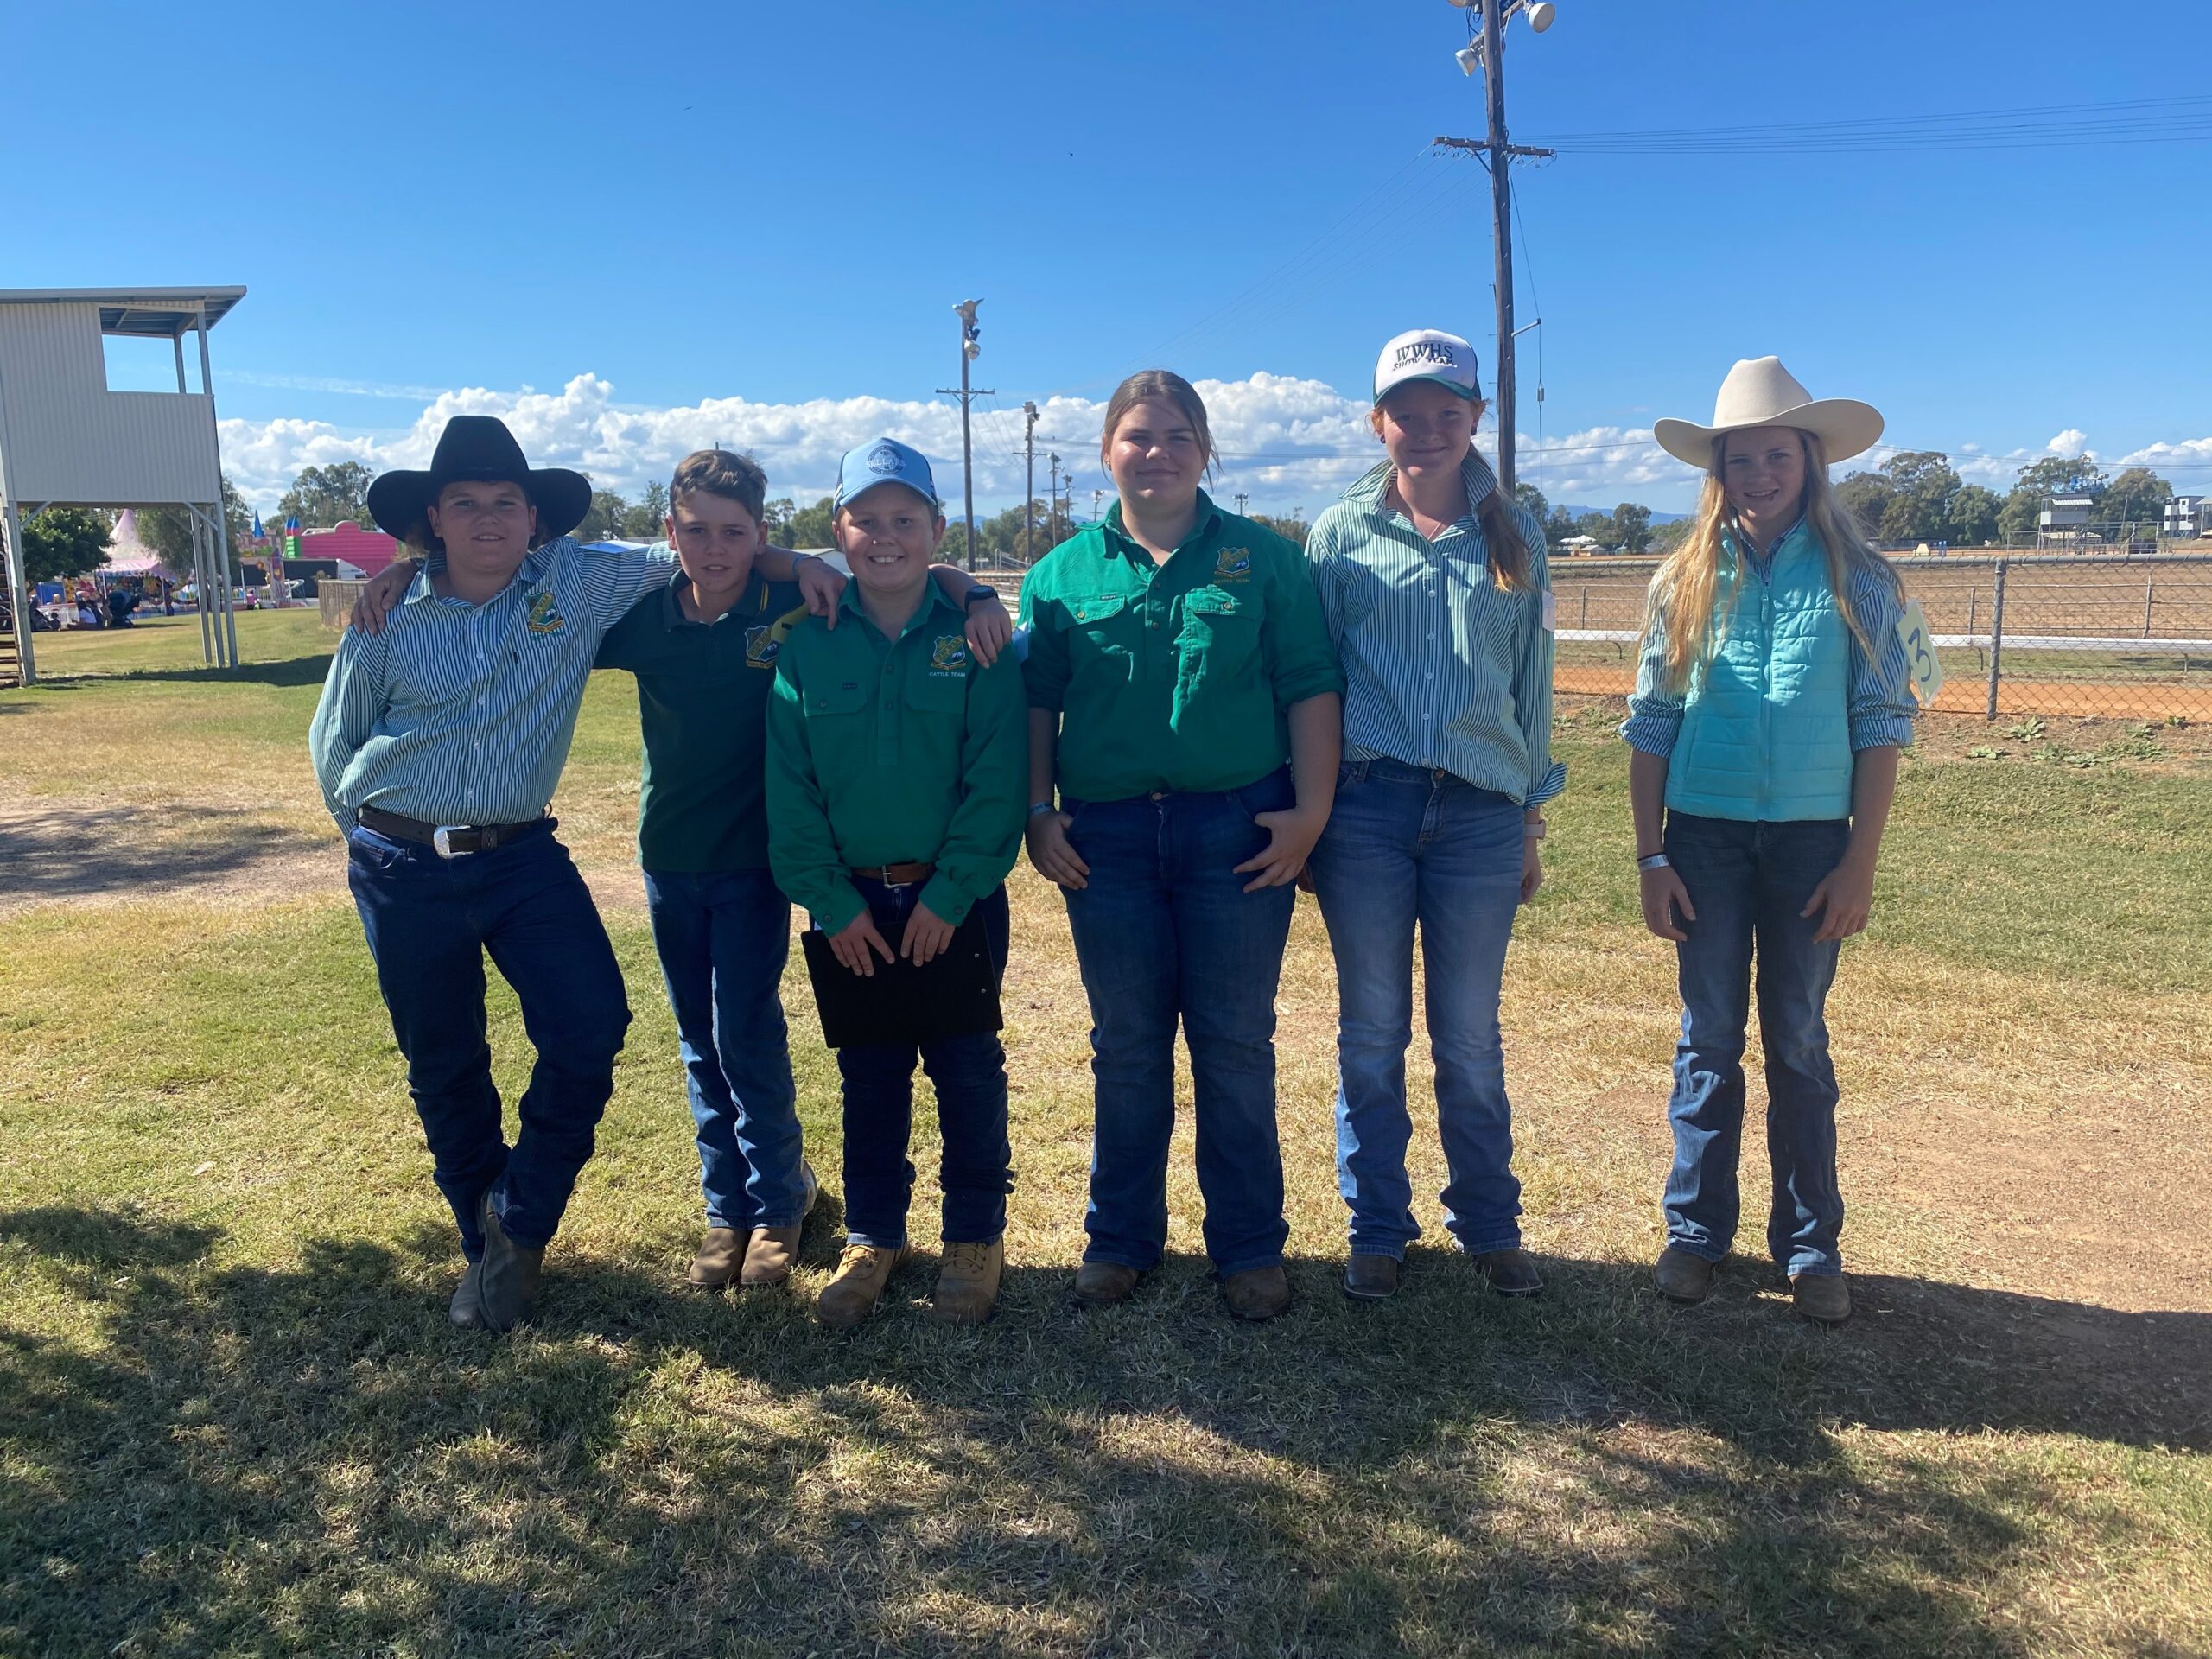 Wee Waa High School students taking part in junior judging were Brody Slee, Kyne Allen, Billy Shearin, Caitlyn Coutts-Smith, Mackenzie Jones and Georgia Haire.